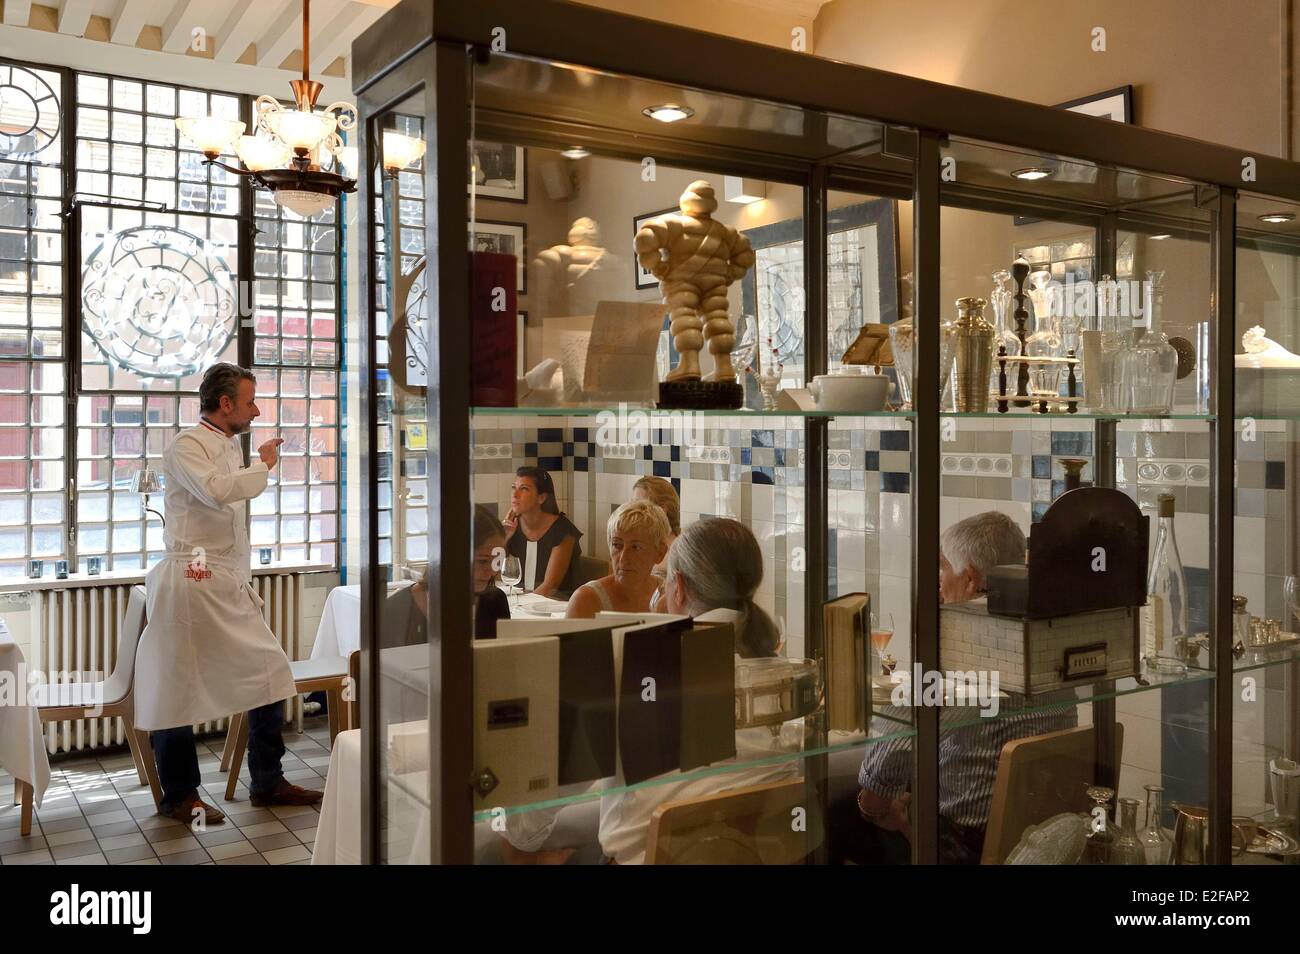 France, Rhone, Lyon, restaurant La Mere Brazier founded in 1921 by Eugenie Brazier, Mathieu Viannay two Michelin stars Chef Stock Photo